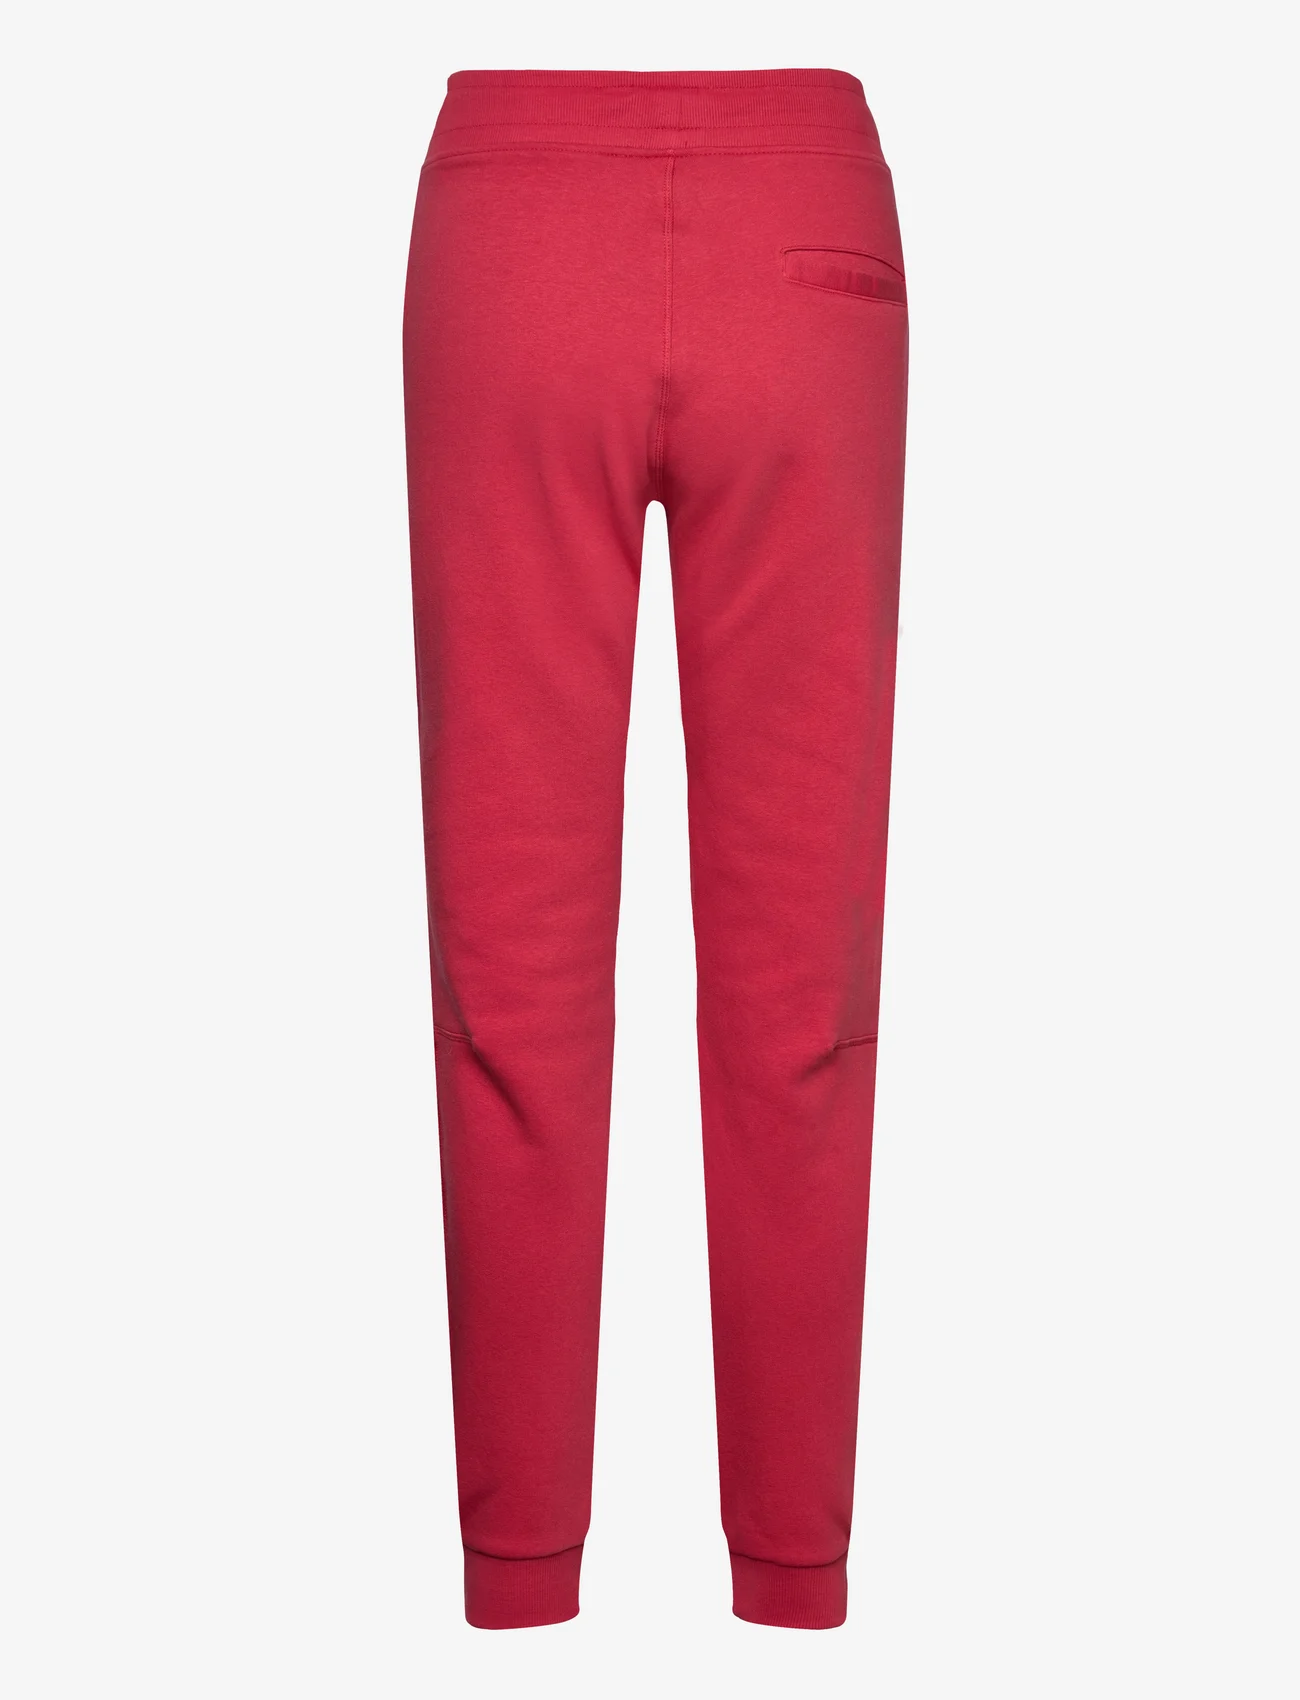 Peak Performance - W Ease Pant - softer red - 1